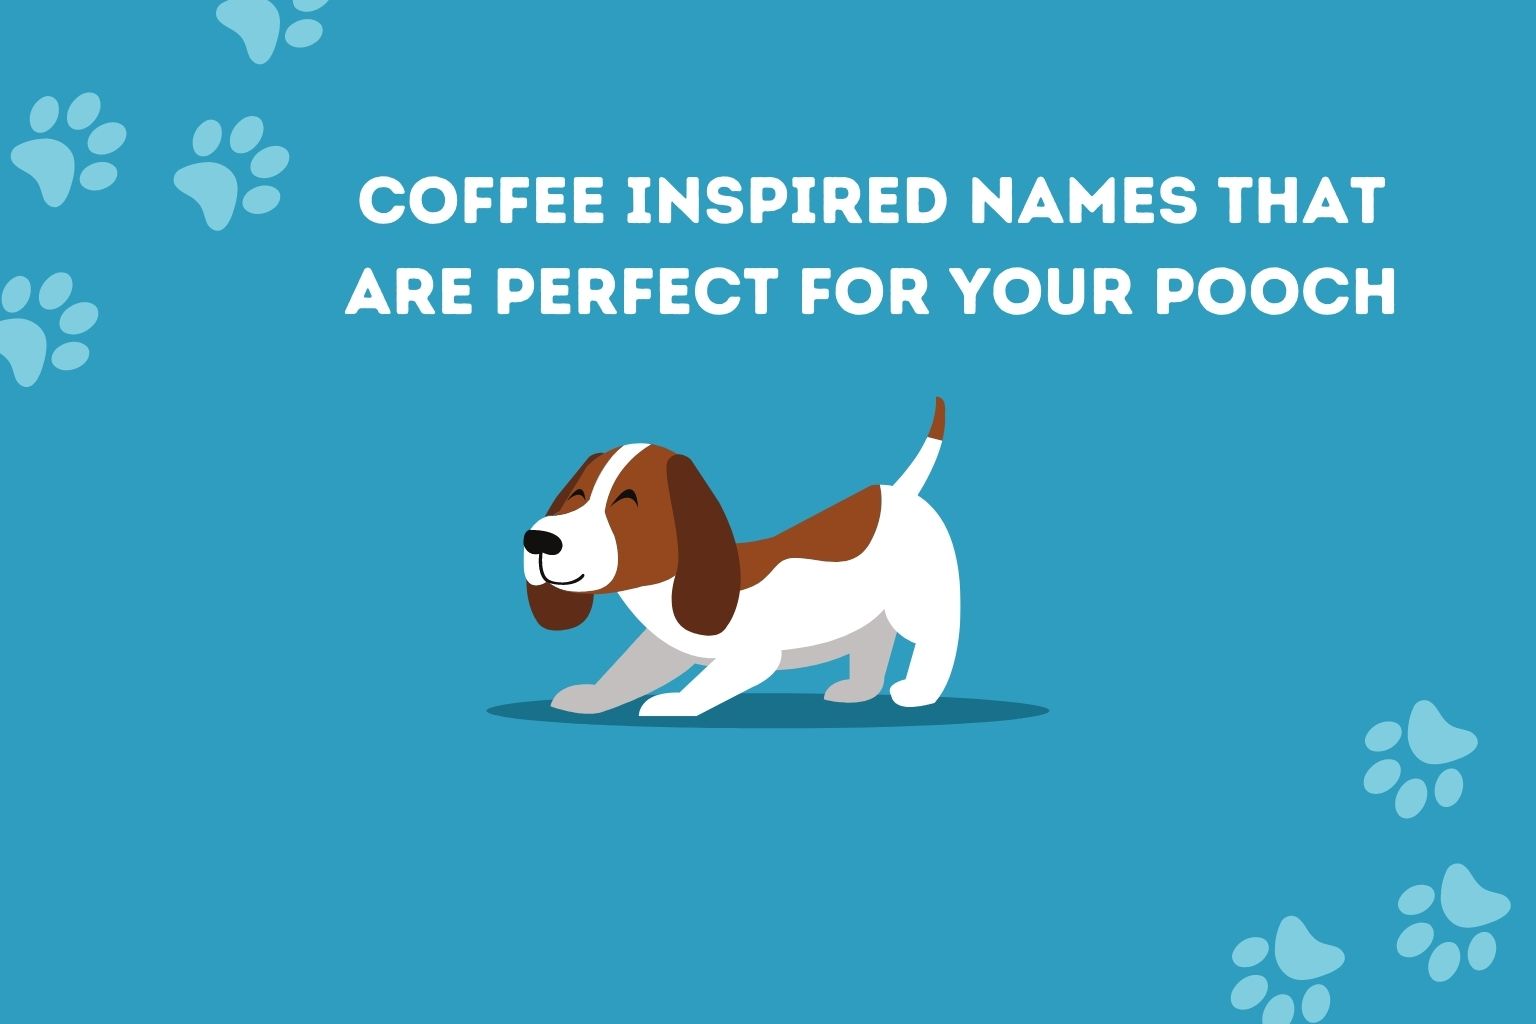 Coffee Inspired Names That Are Perfect for Your Pooch